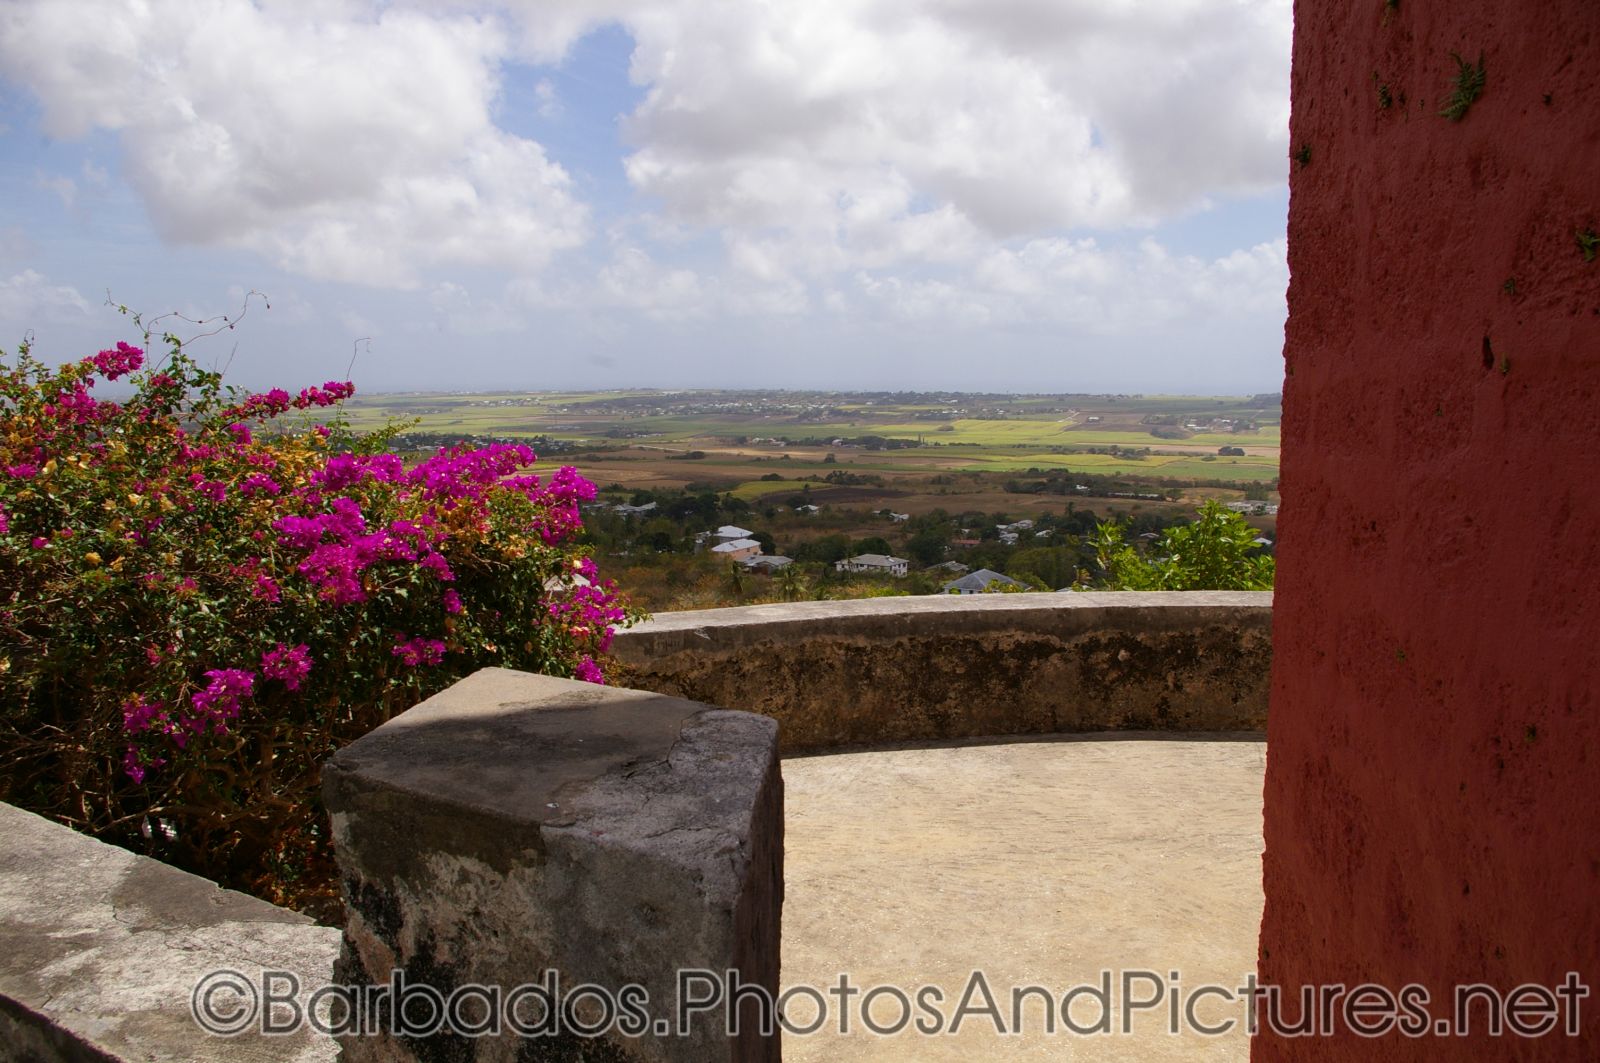 Landing area with pink flowers and nice view at Gun Hill Signal Station in Barbados.jpg
